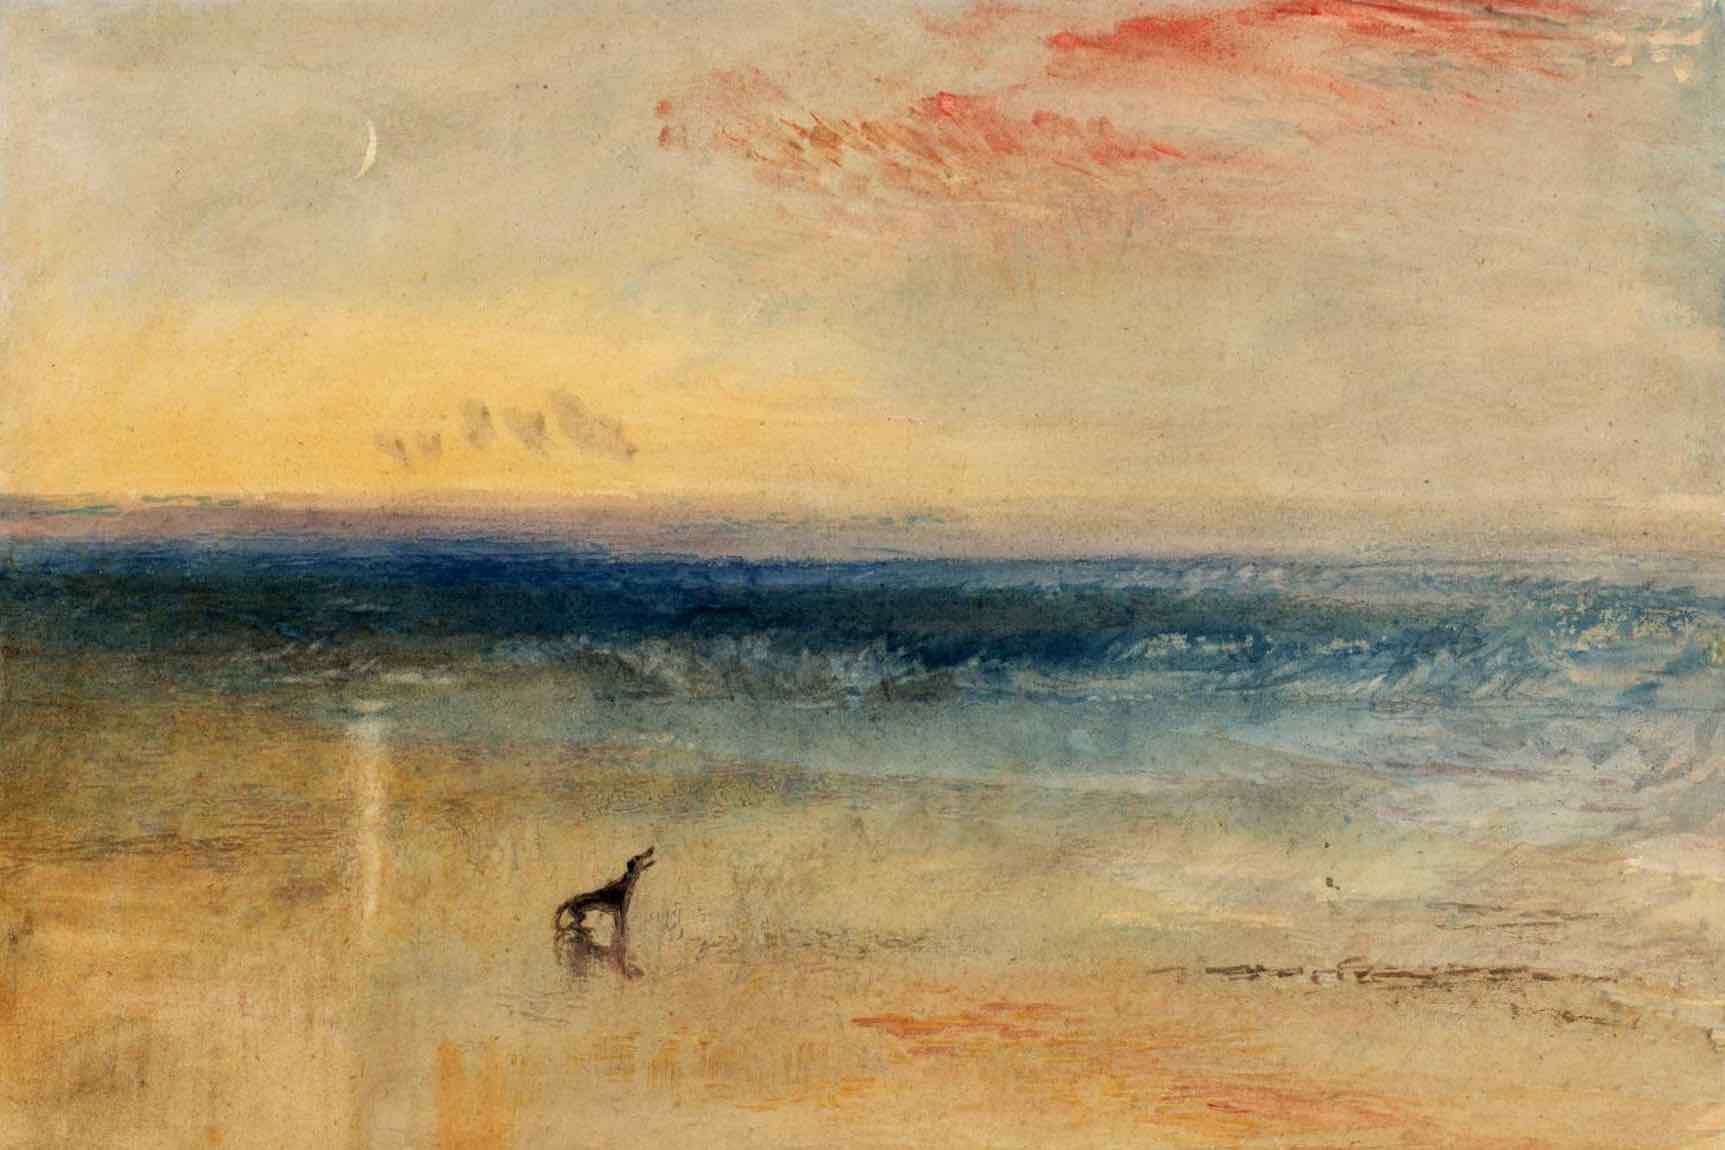 William-Turner-Dawn-after-the-wreck.jpg